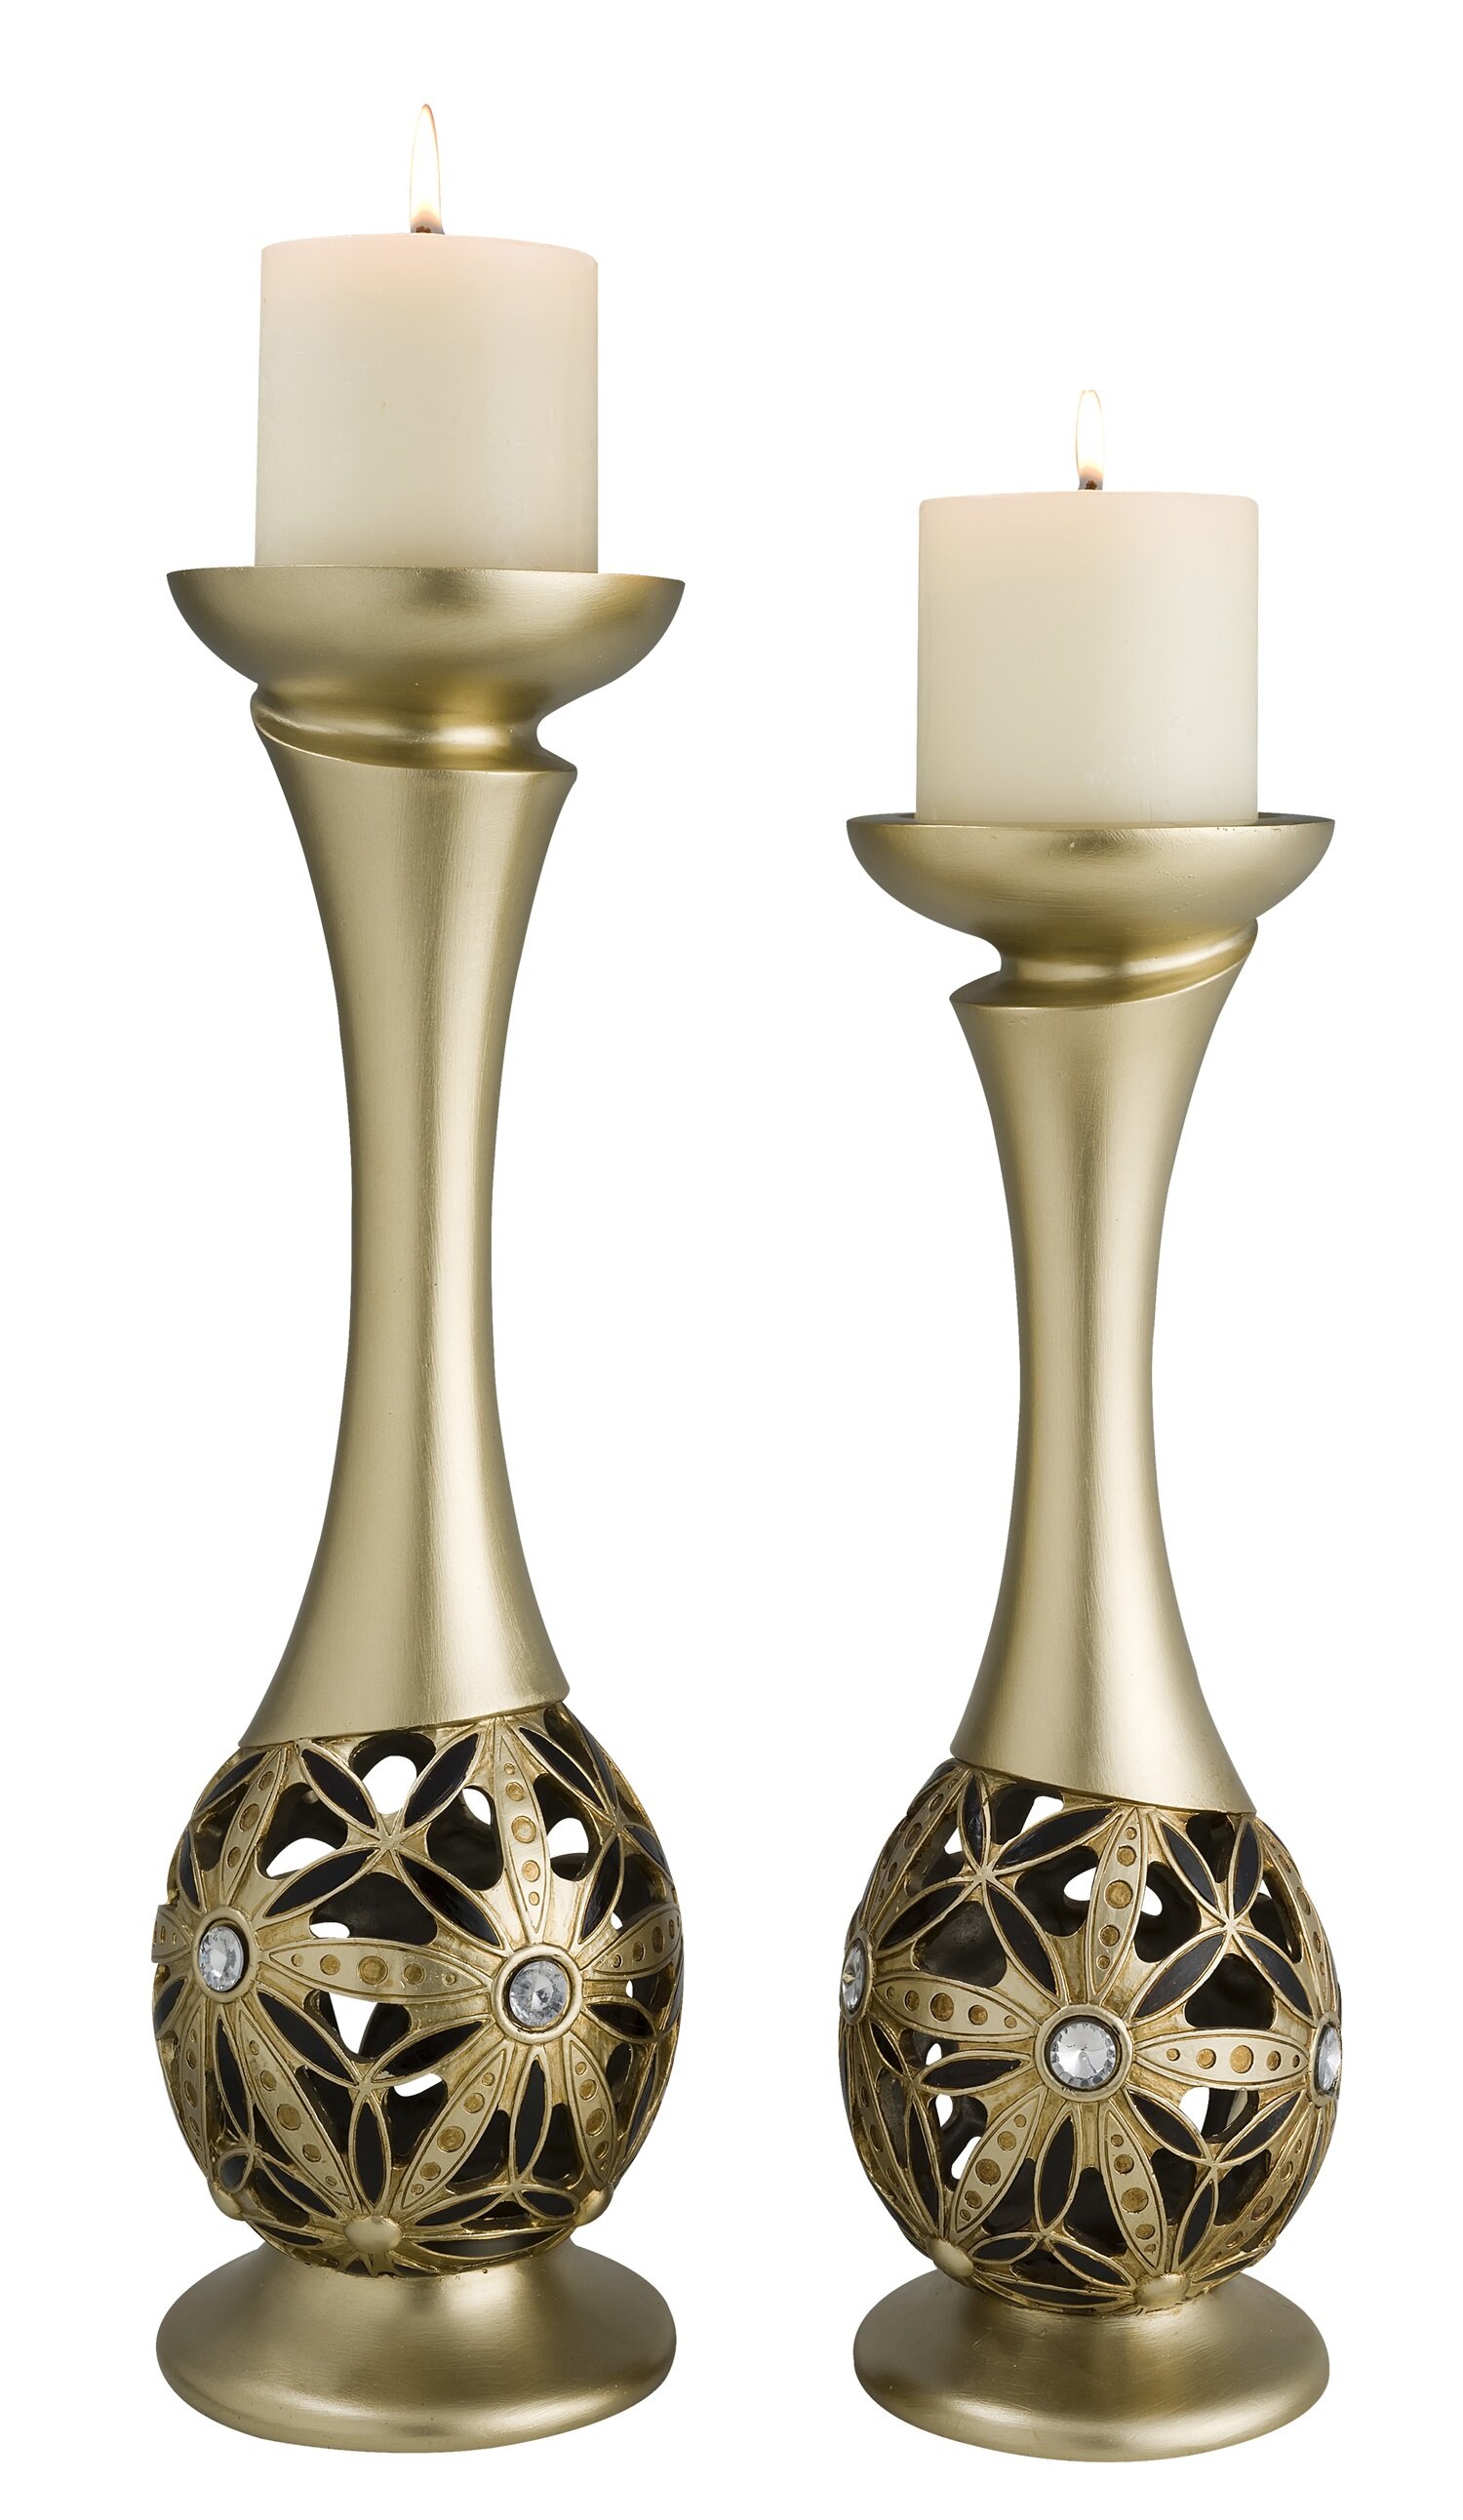 Hand-Carved Golden Sunflower Taper Candles